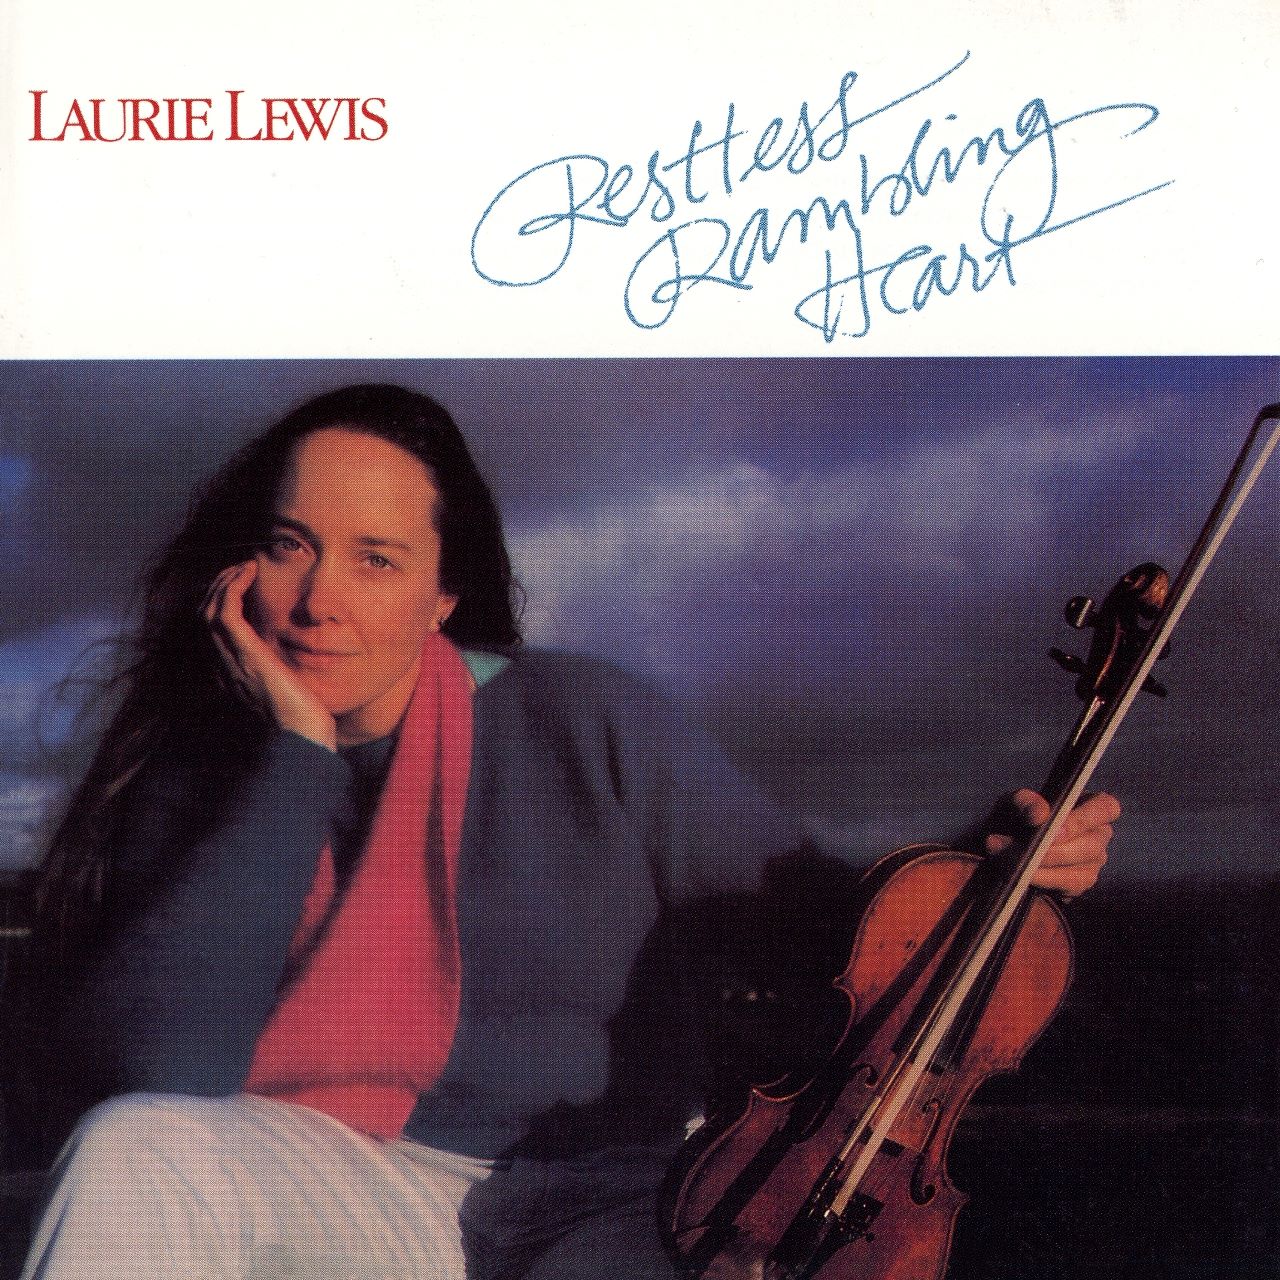 Laurie Lewis - Restless Rambling Heart cover album